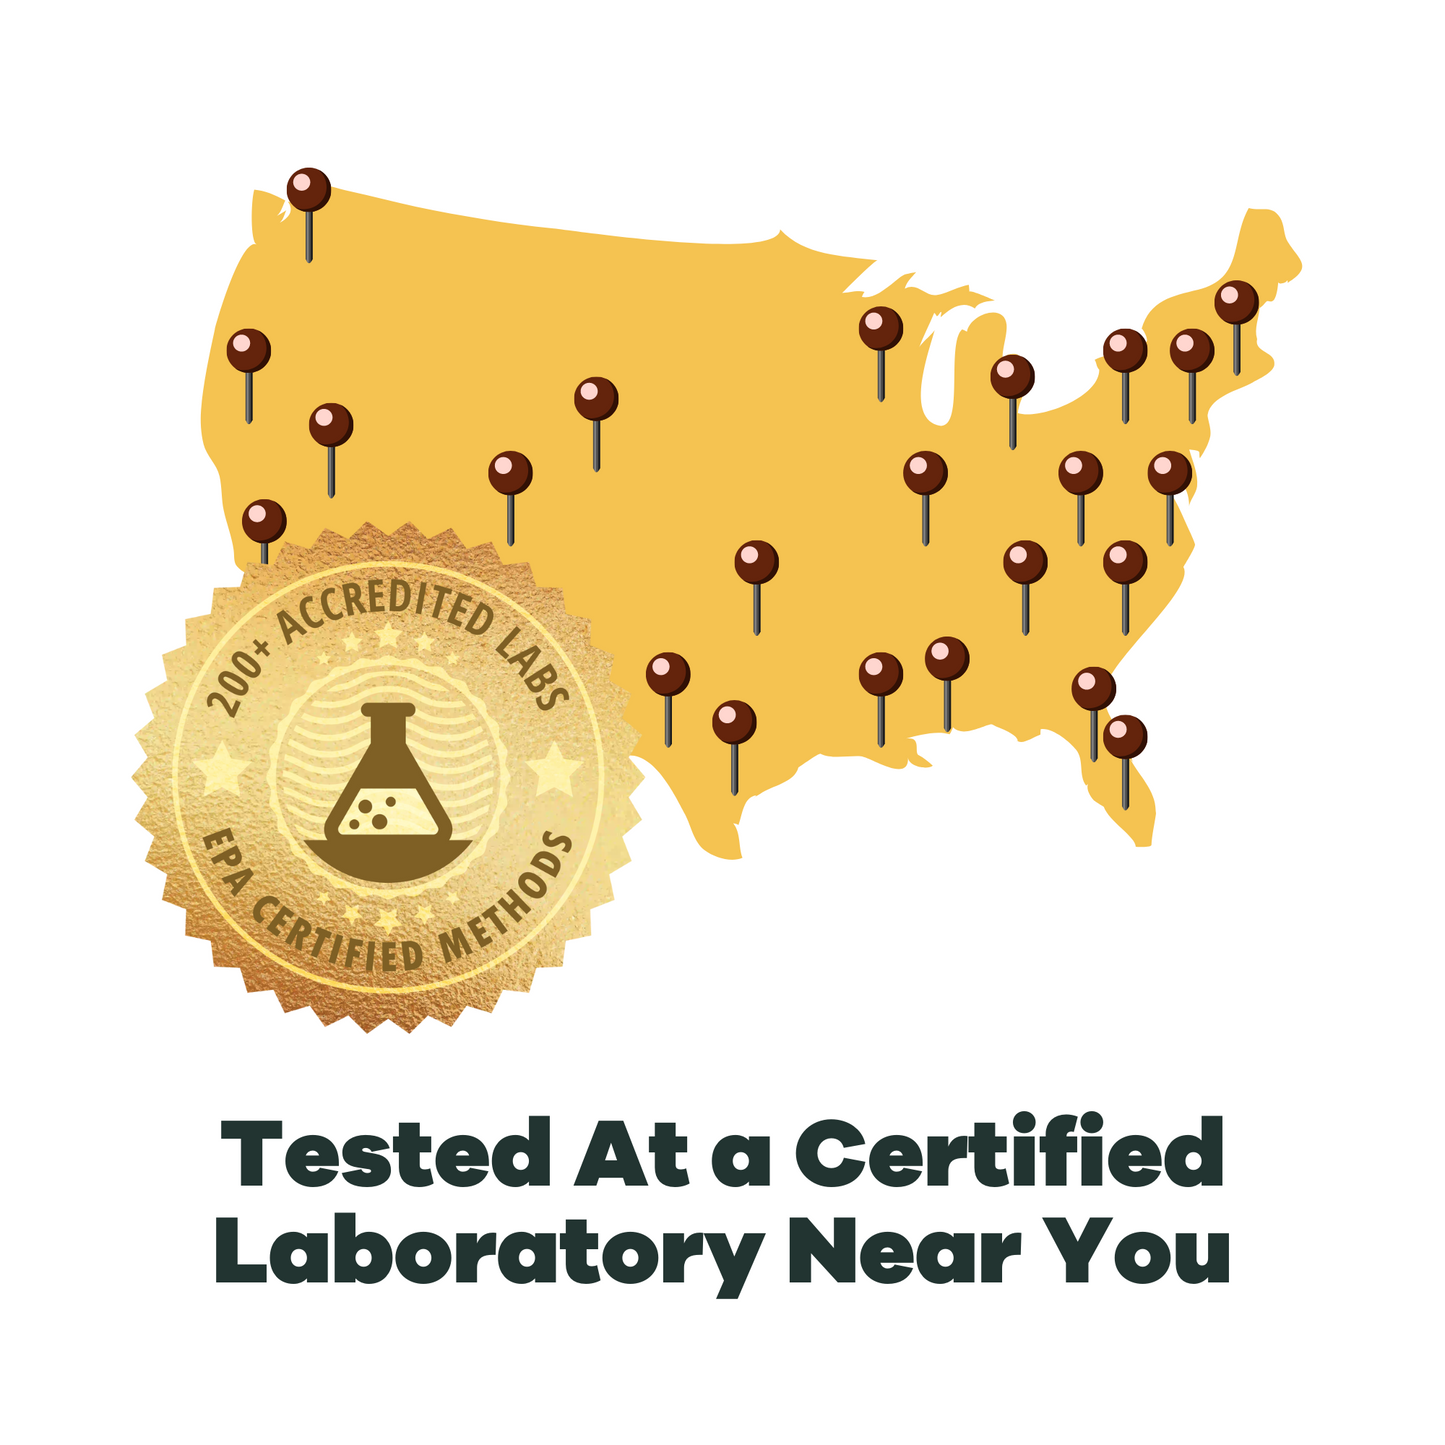 Tested at certified laboratories 